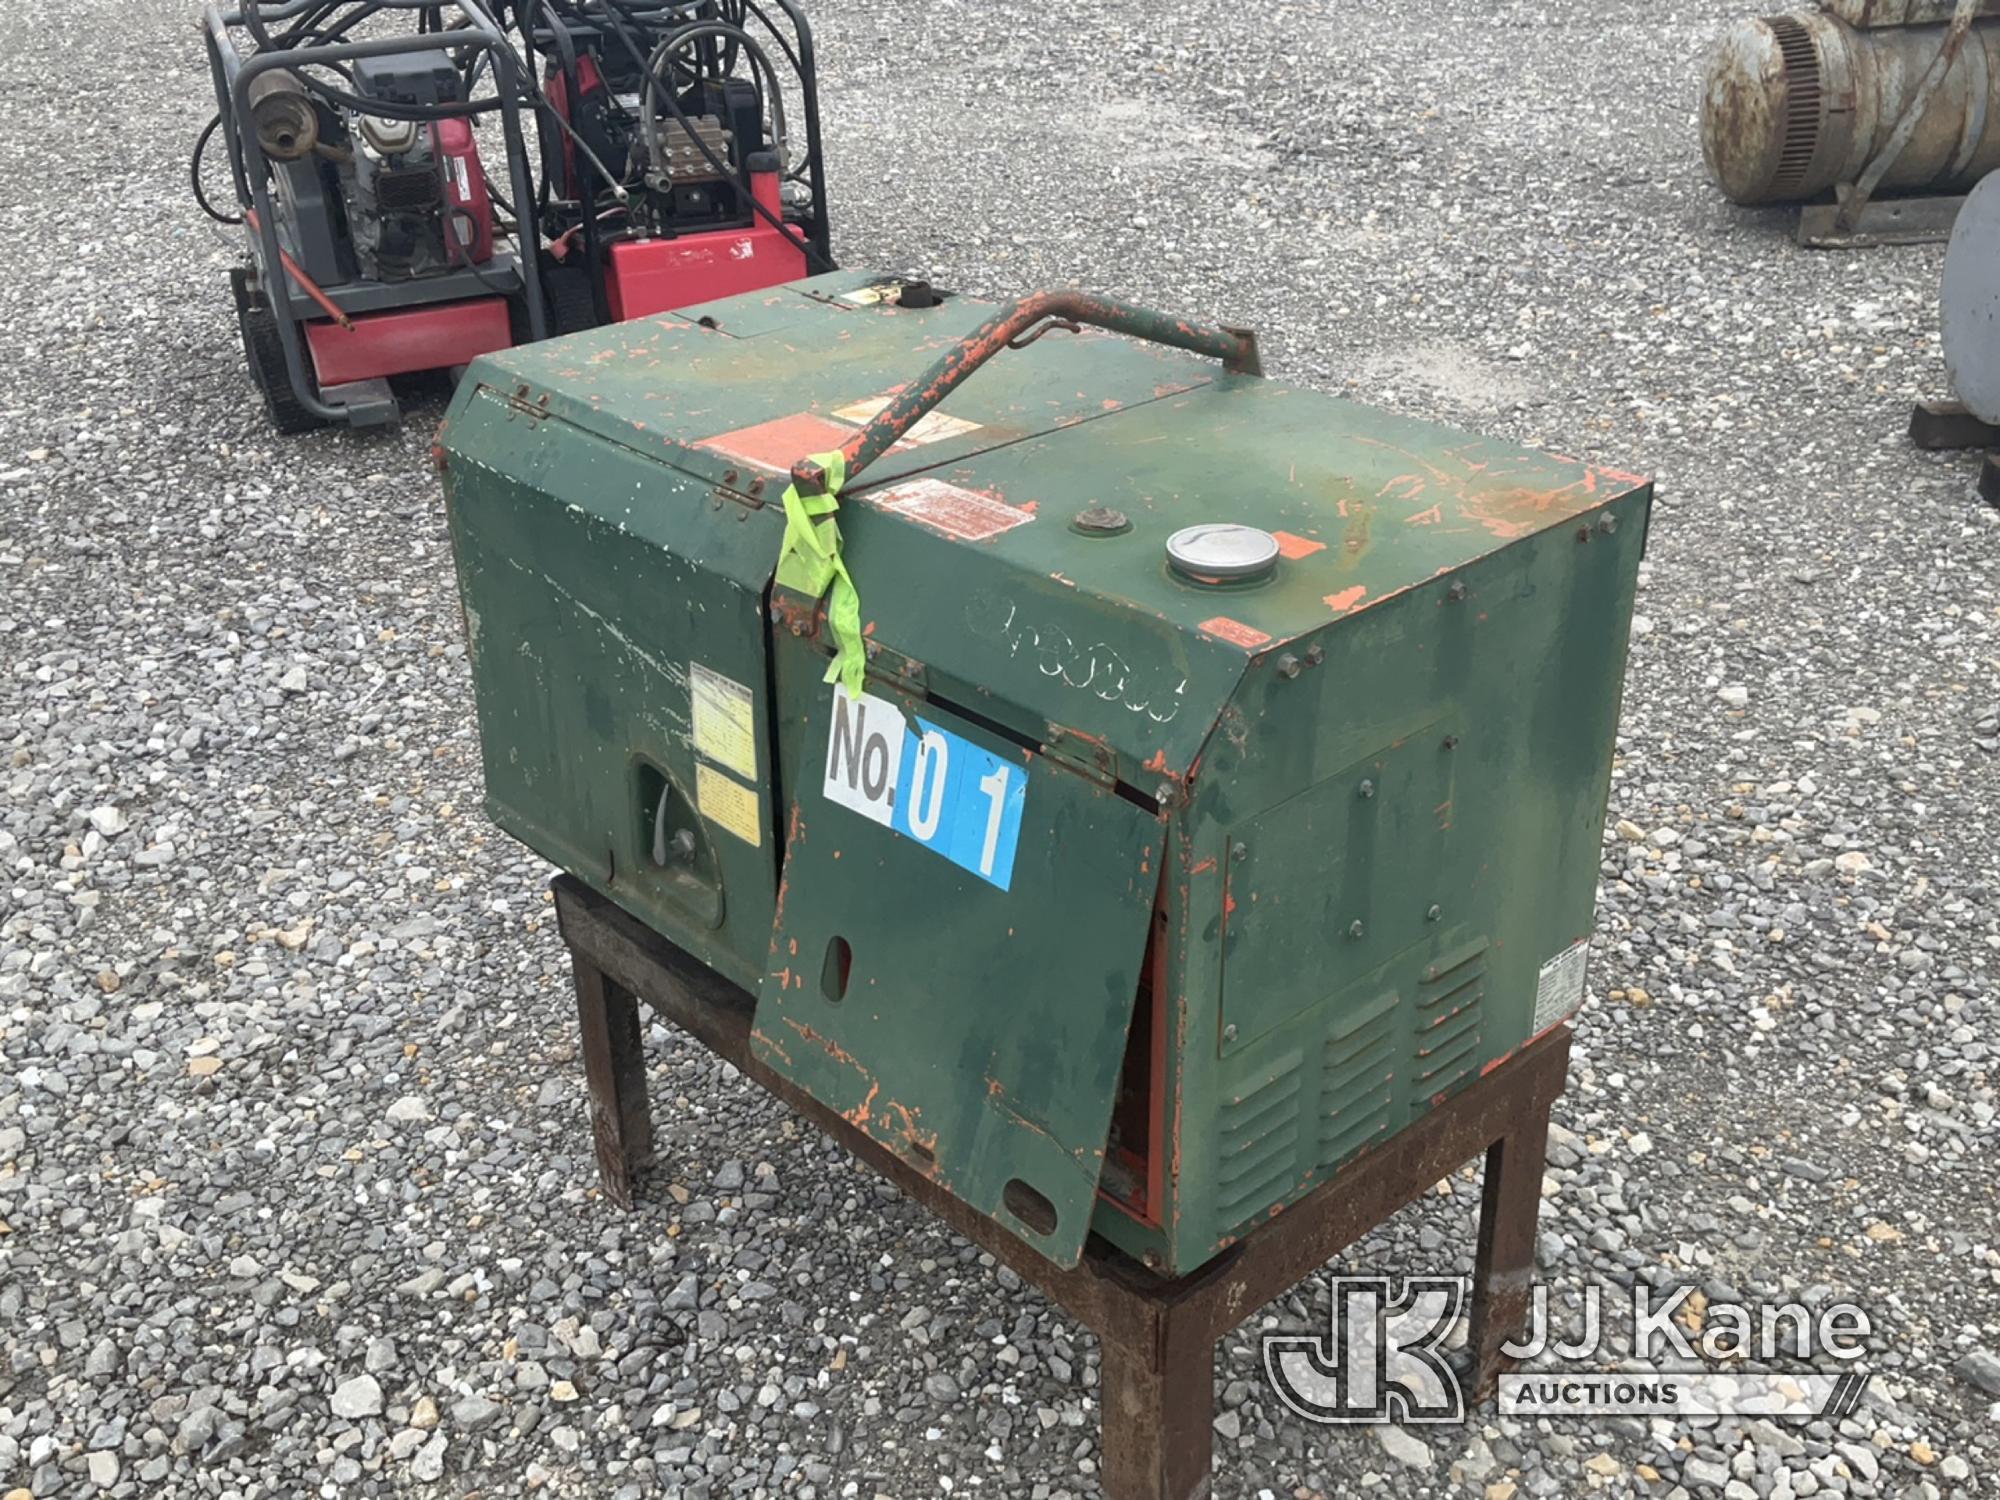 (Hawk Point, MO) Kubota Portable Generator Not Running & Conditions Unknown